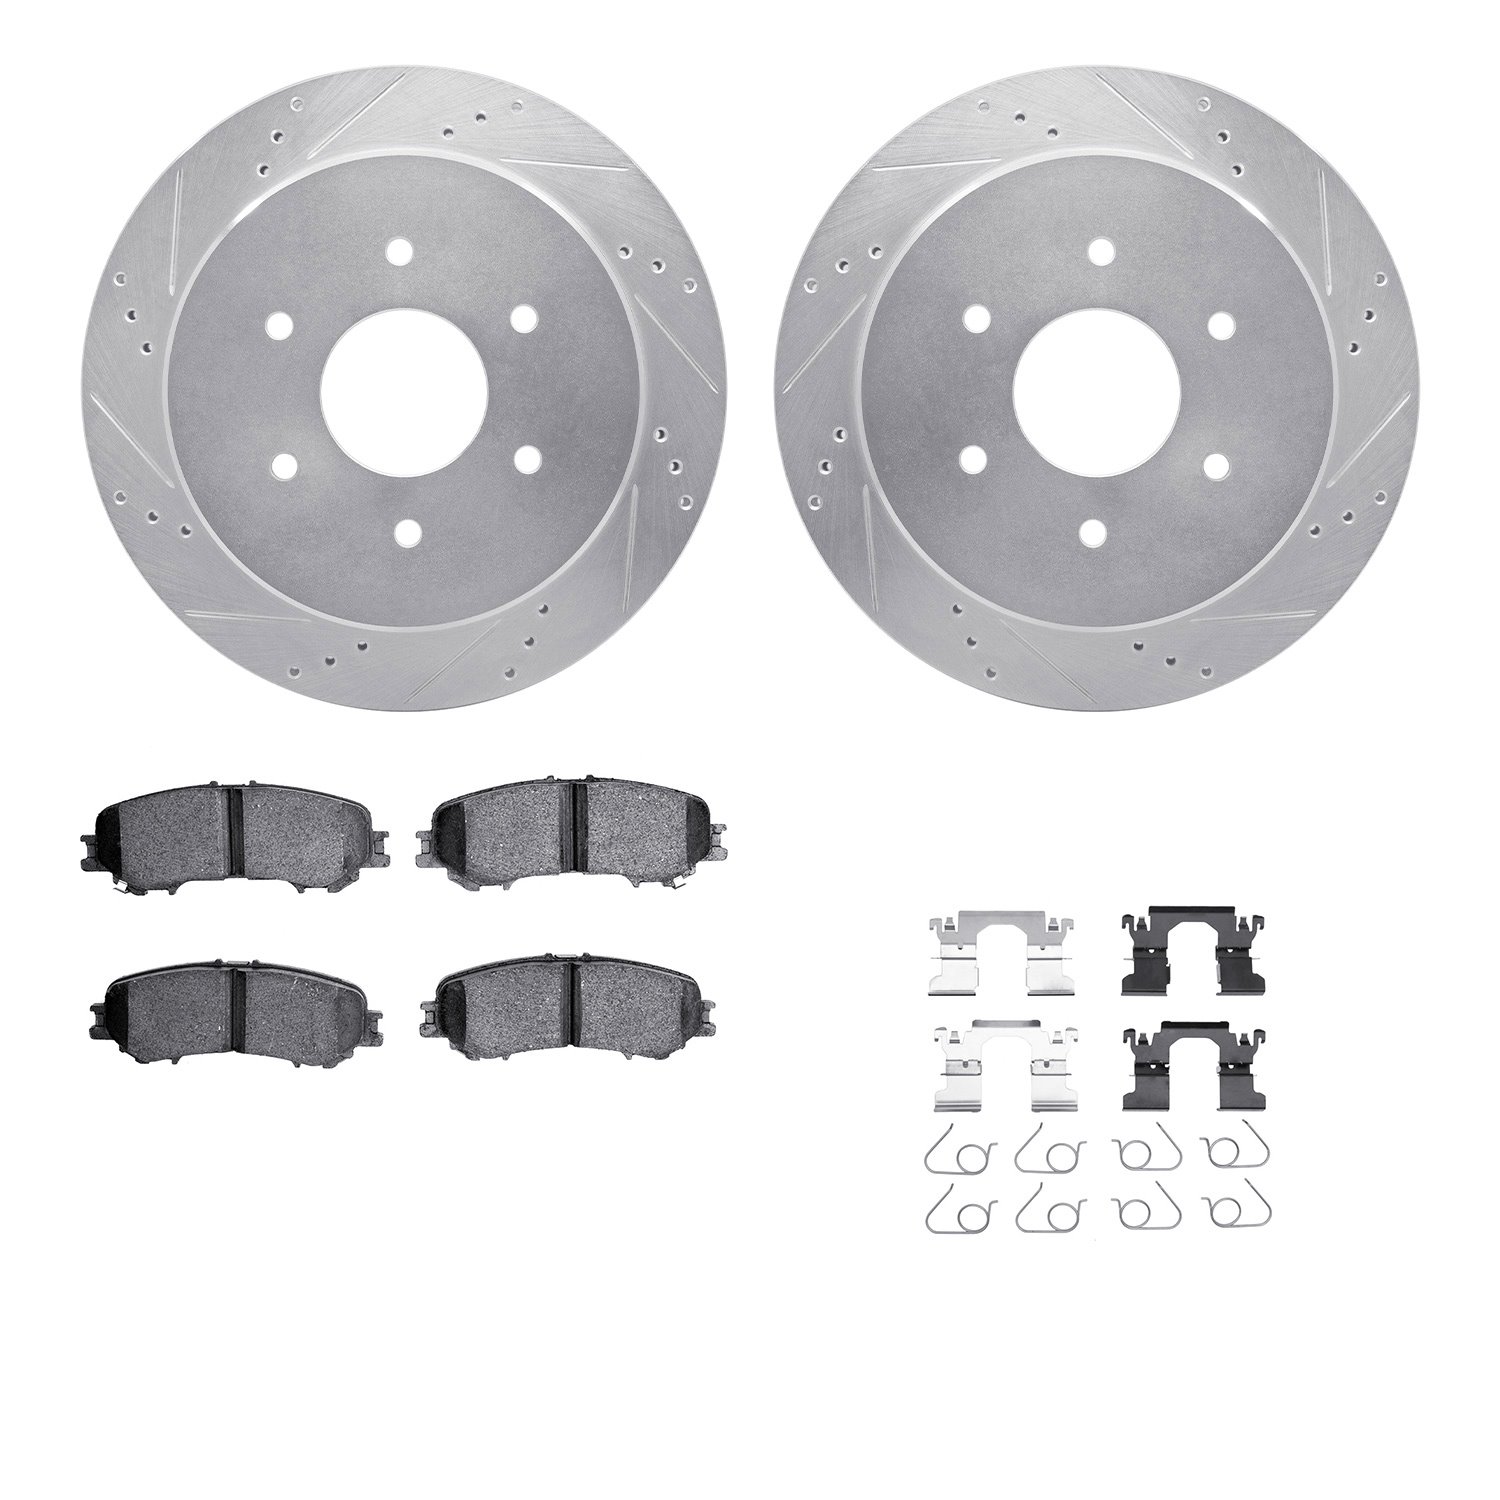 7412-67010 Drilled/Slotted Brake Rotors with Ultimate-Duty Brake Pads Kit & Hardware [Silver], Fits Select Infiniti/Nissan, Posi